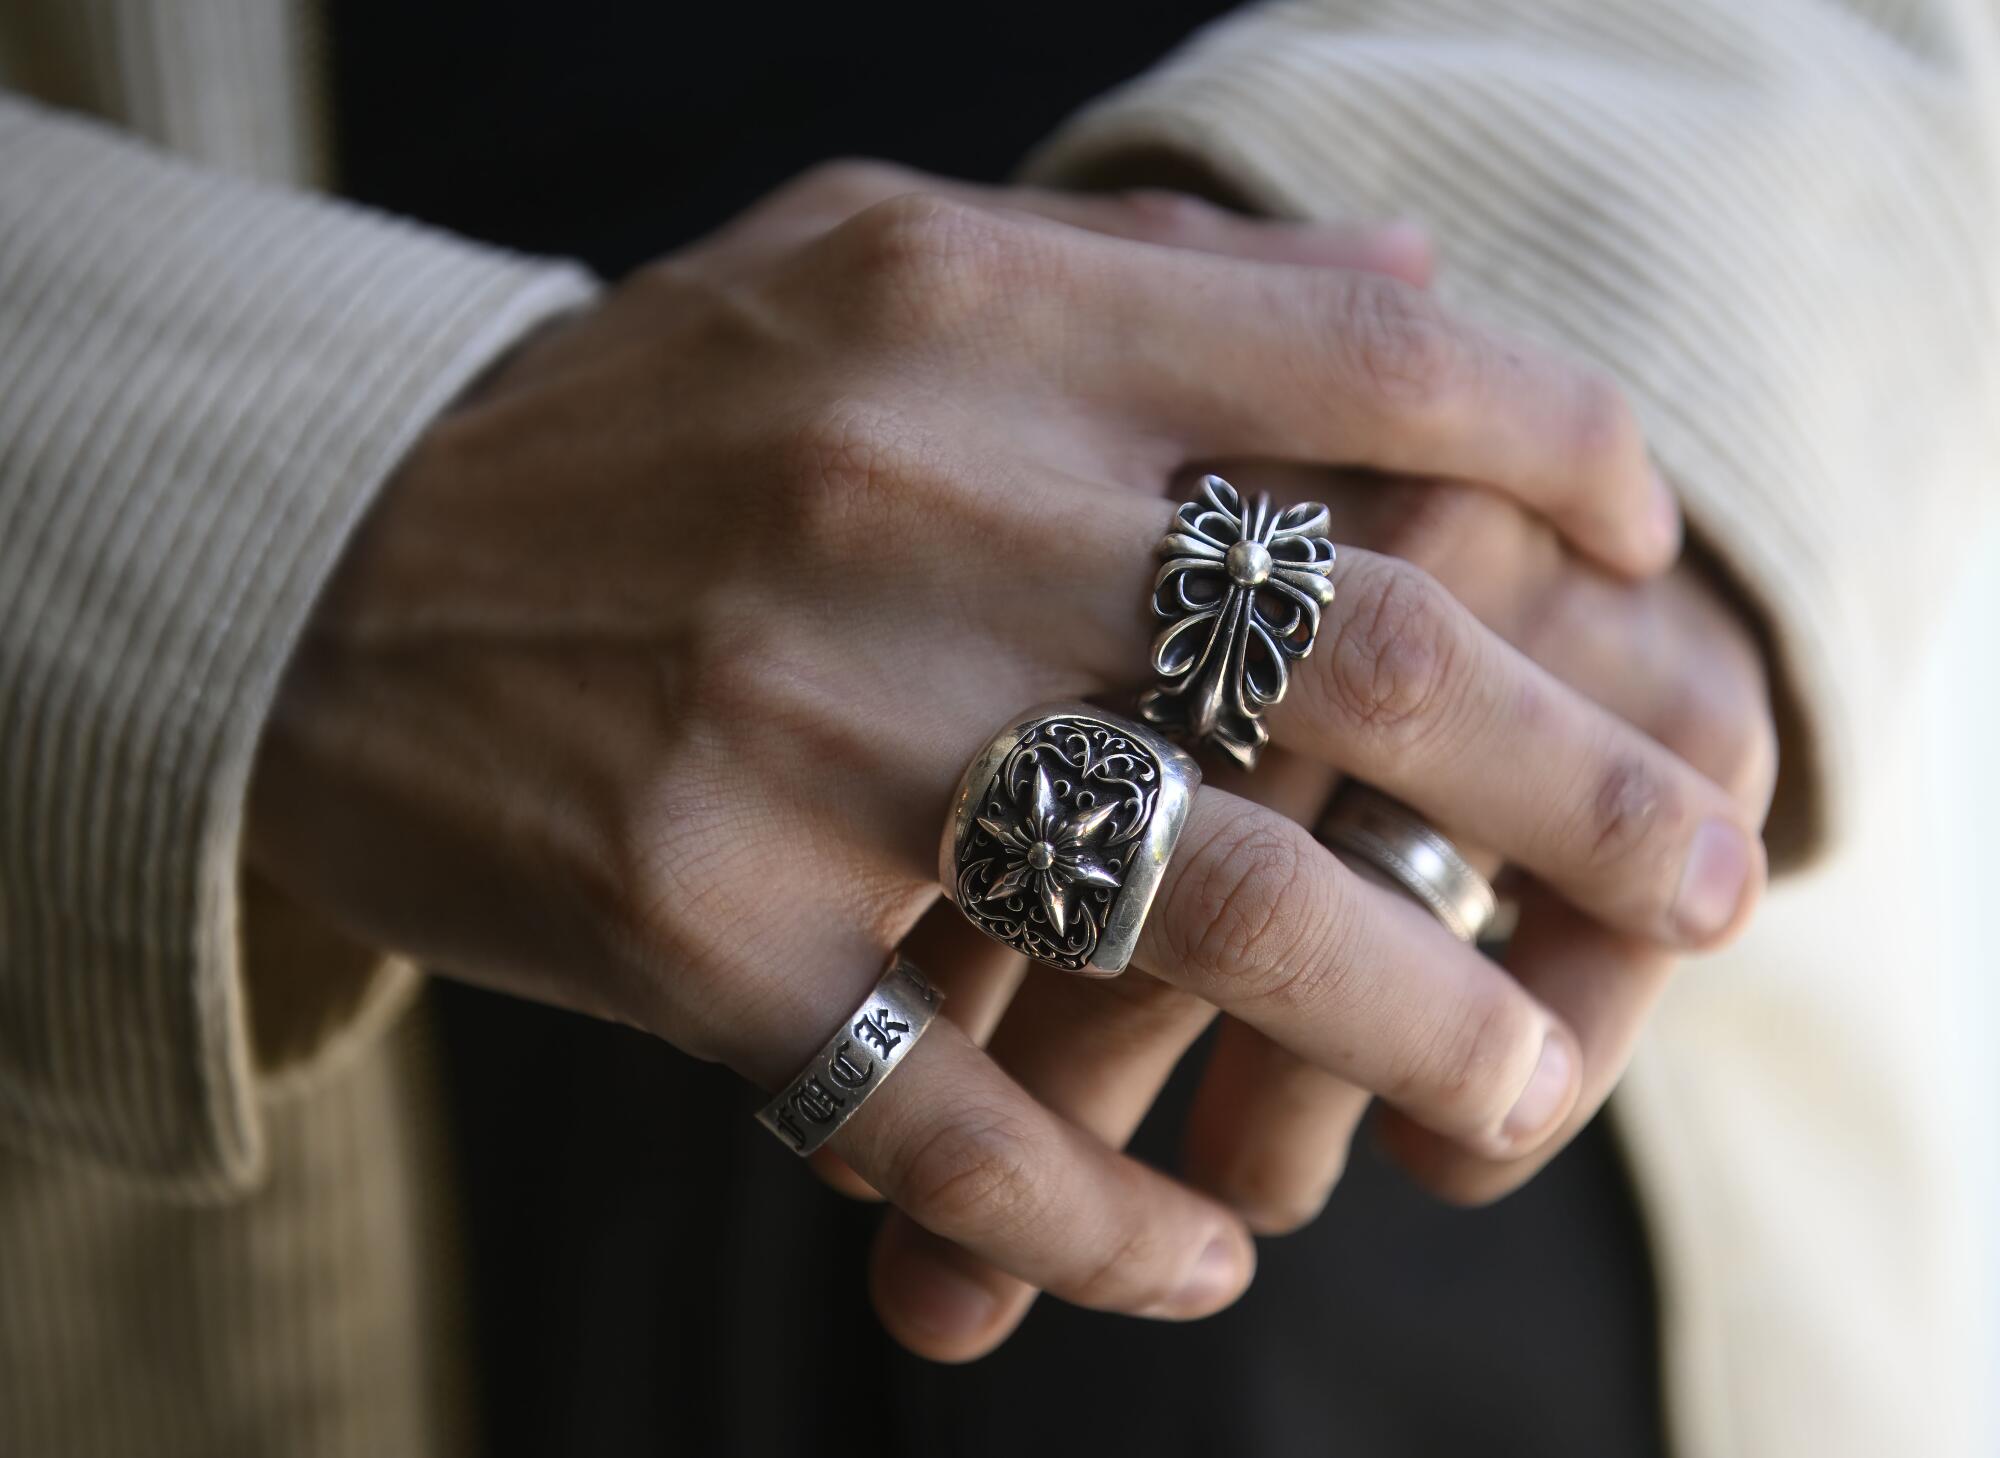 A man wears rings on some of his fingers.